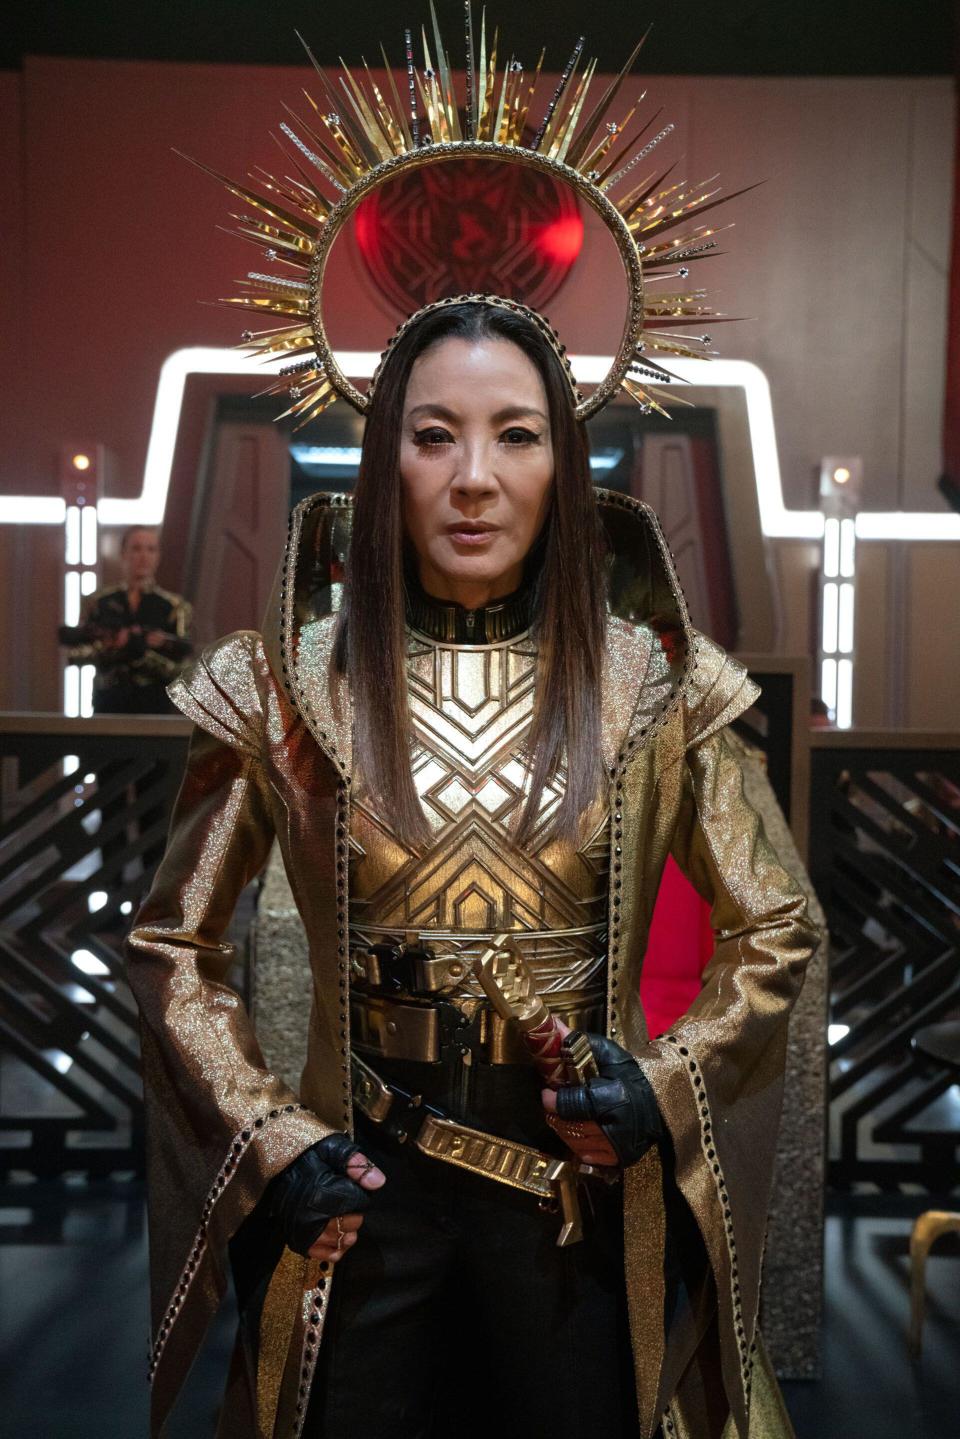 MICHELLE YEOH in STAR TREK: DISCOVERY (2017), directed by ALEX KURTZMAN and BRYAN FULLER. Credit: CBS Television Studios, Living Dead Guy Productions, Rodden / Album